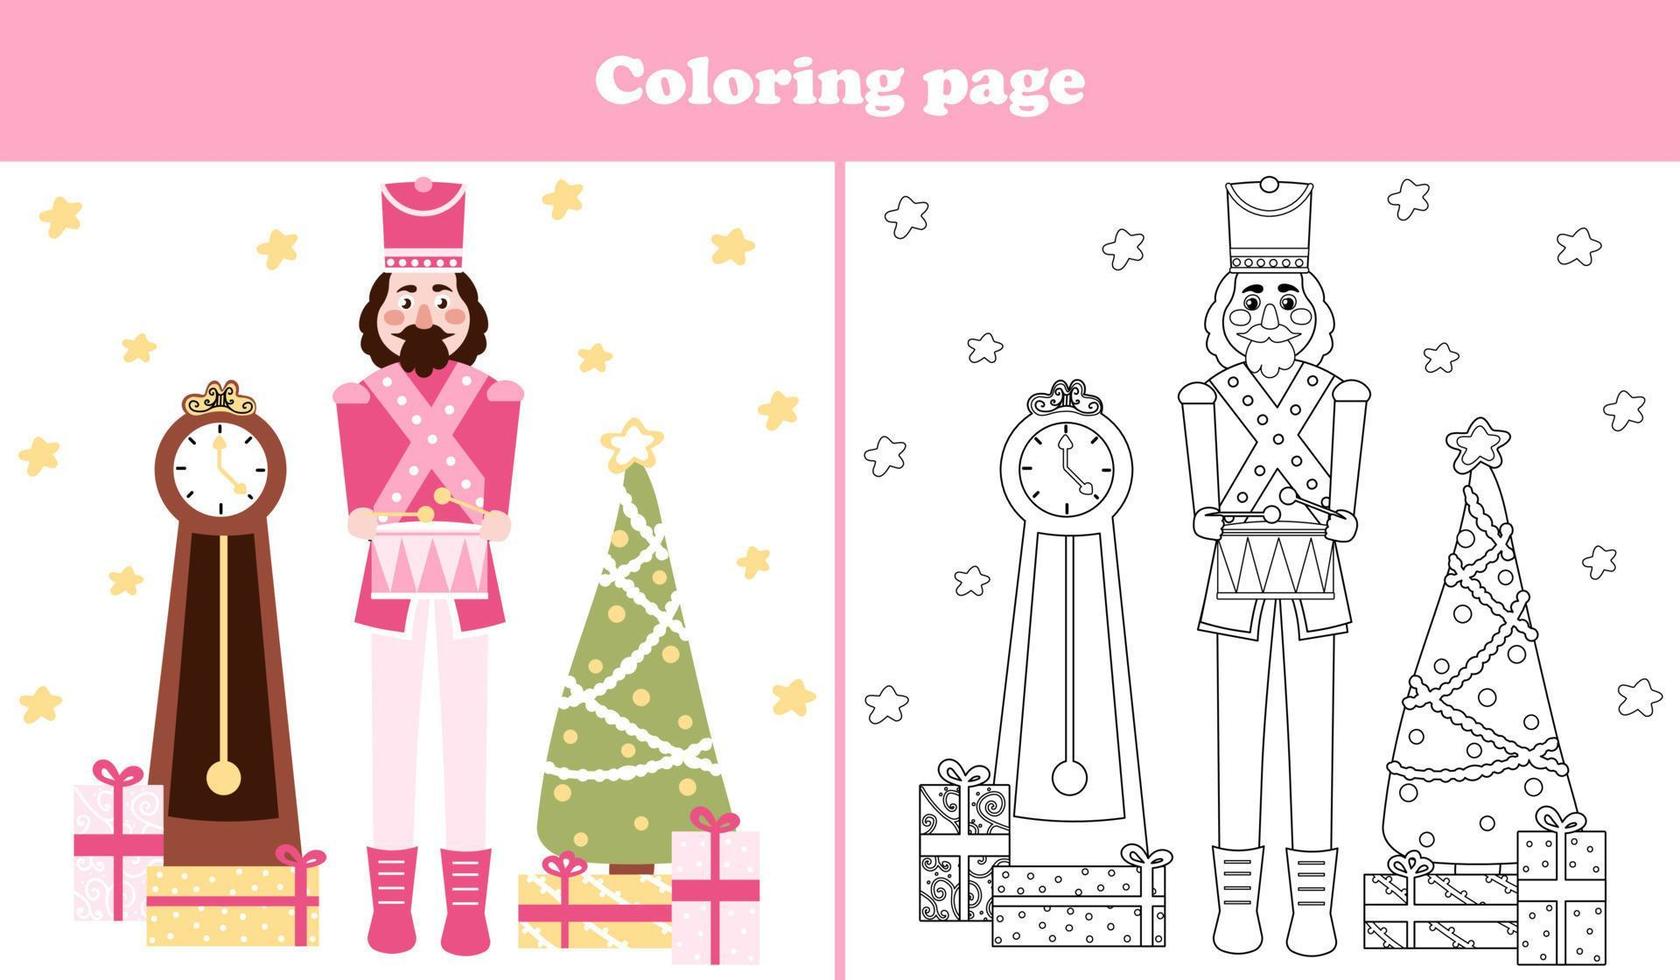 Christmas coloring page with cute nutcracker character and xmas tree with gift boxes in cartoon childish style vector